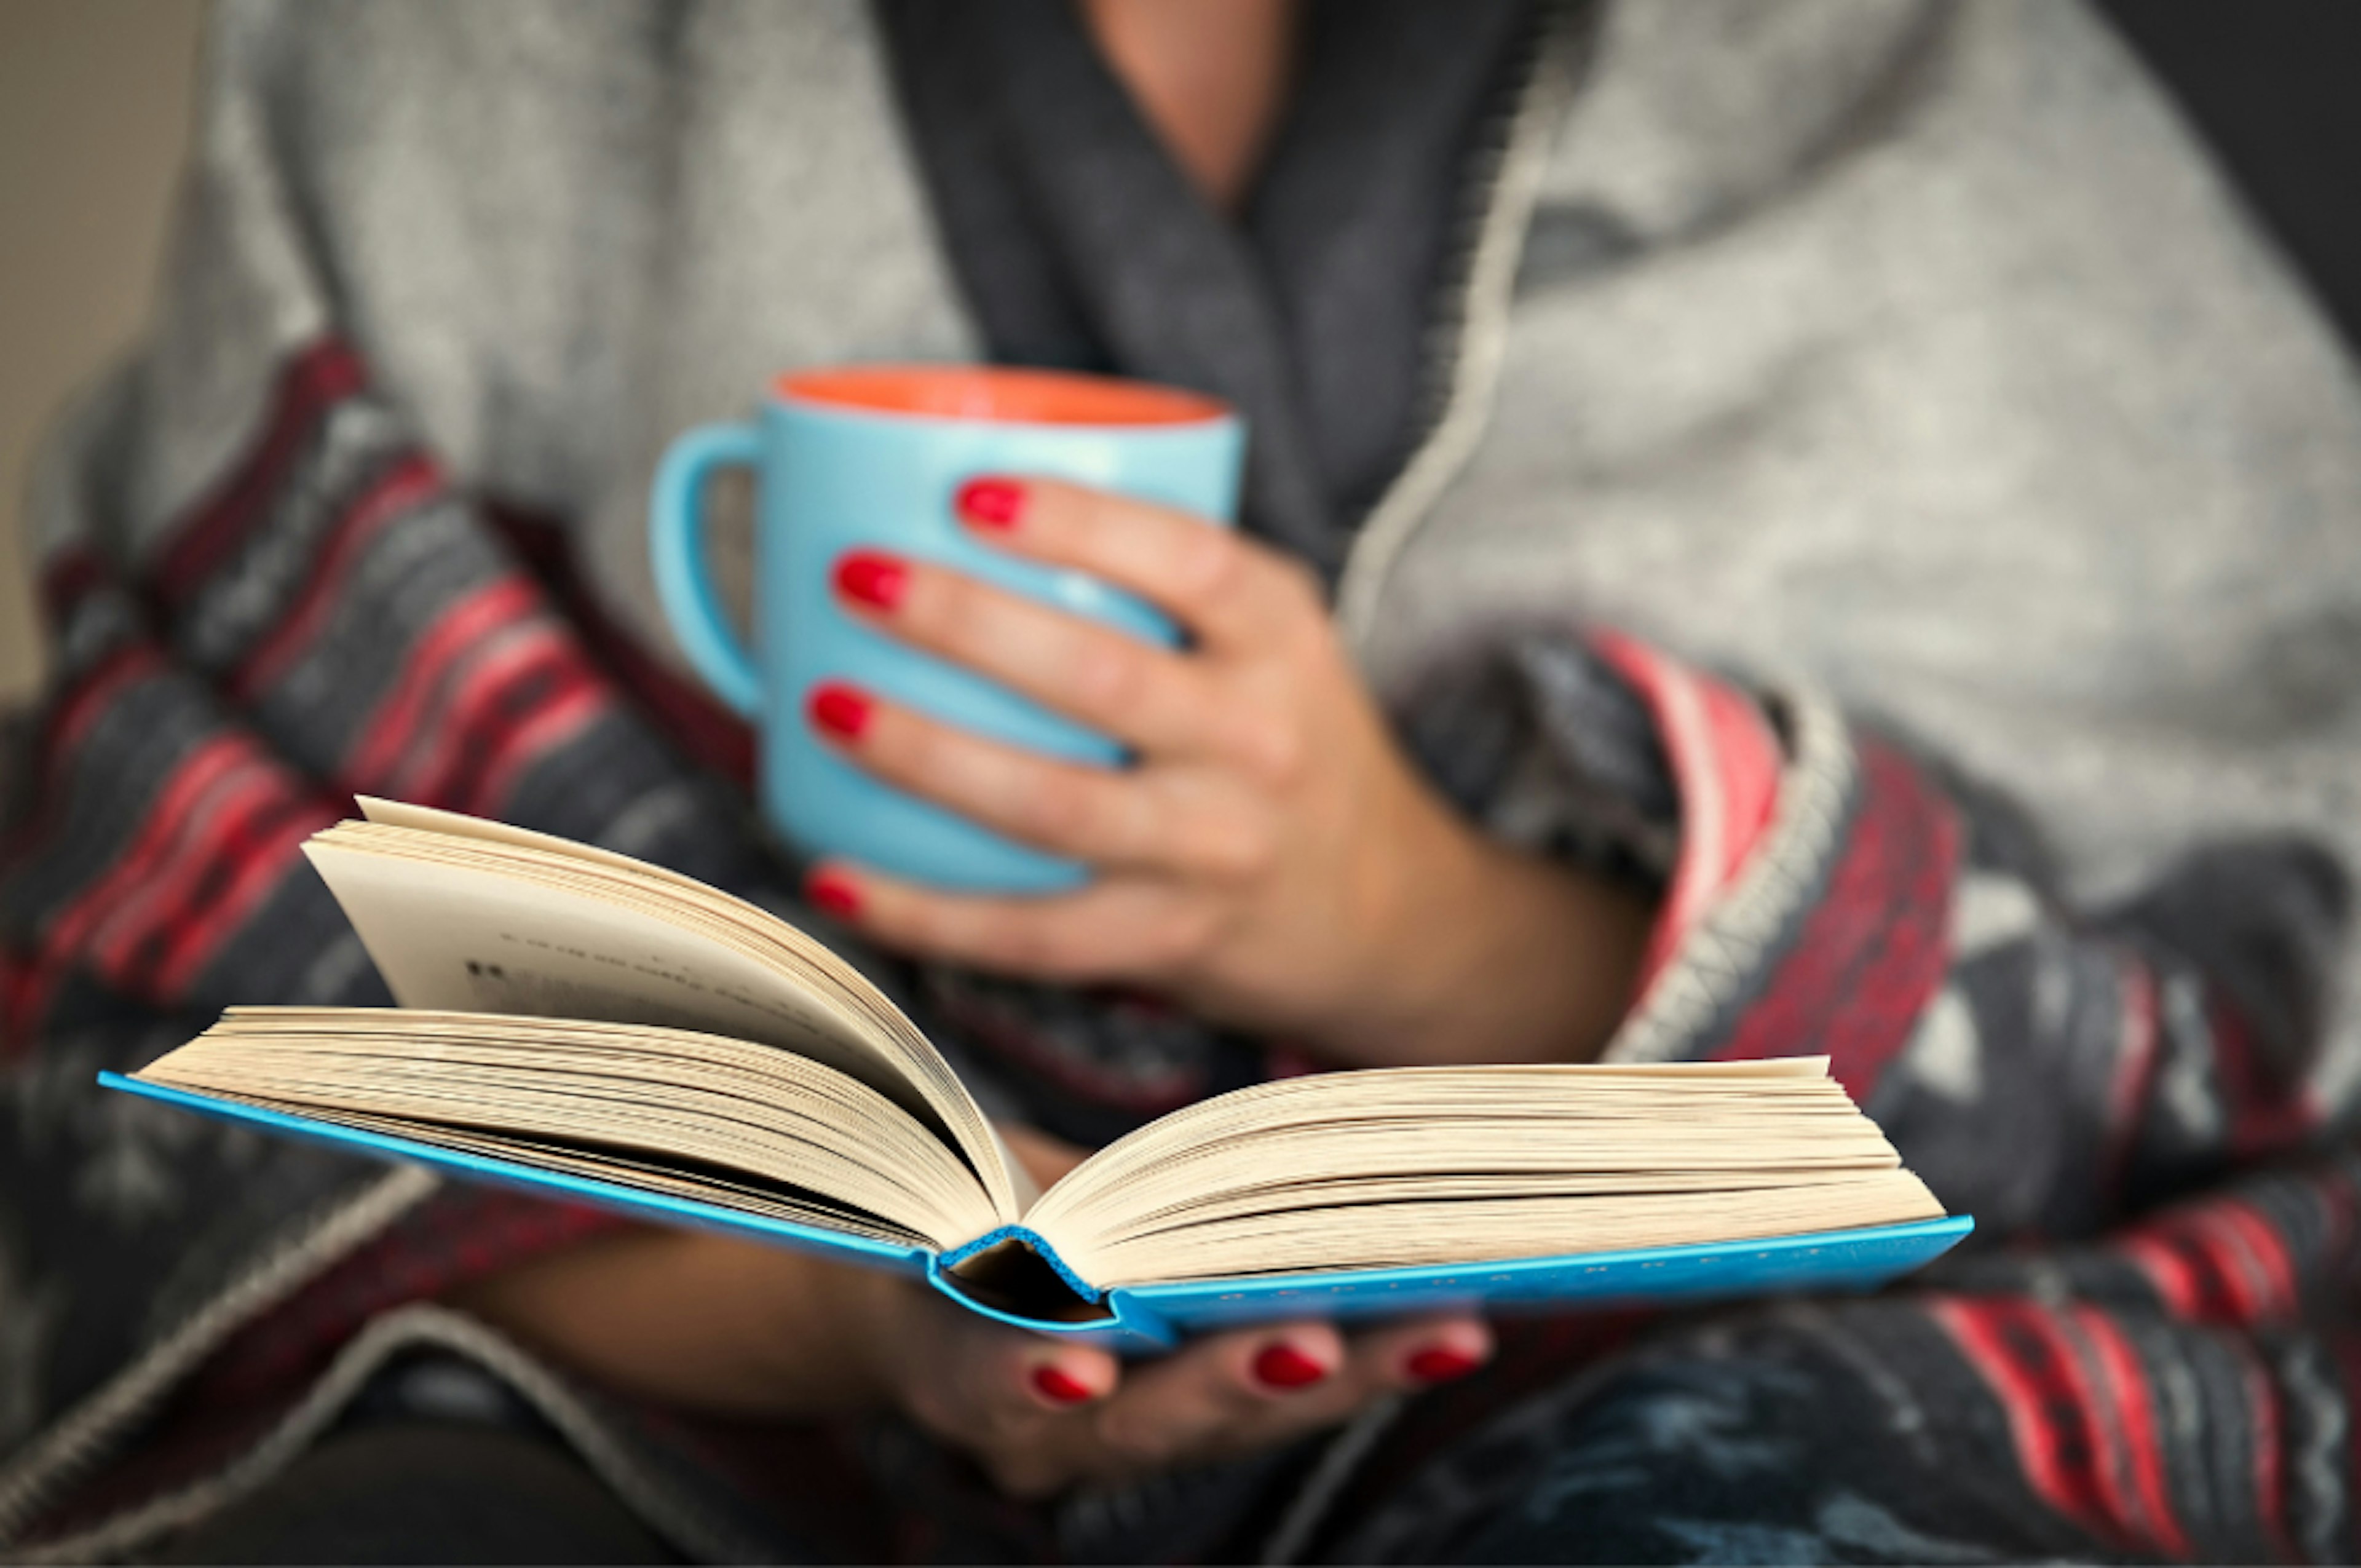 Behavioral Health Homes Tile: Person snuggled up in blanket reading book while holding a mug.